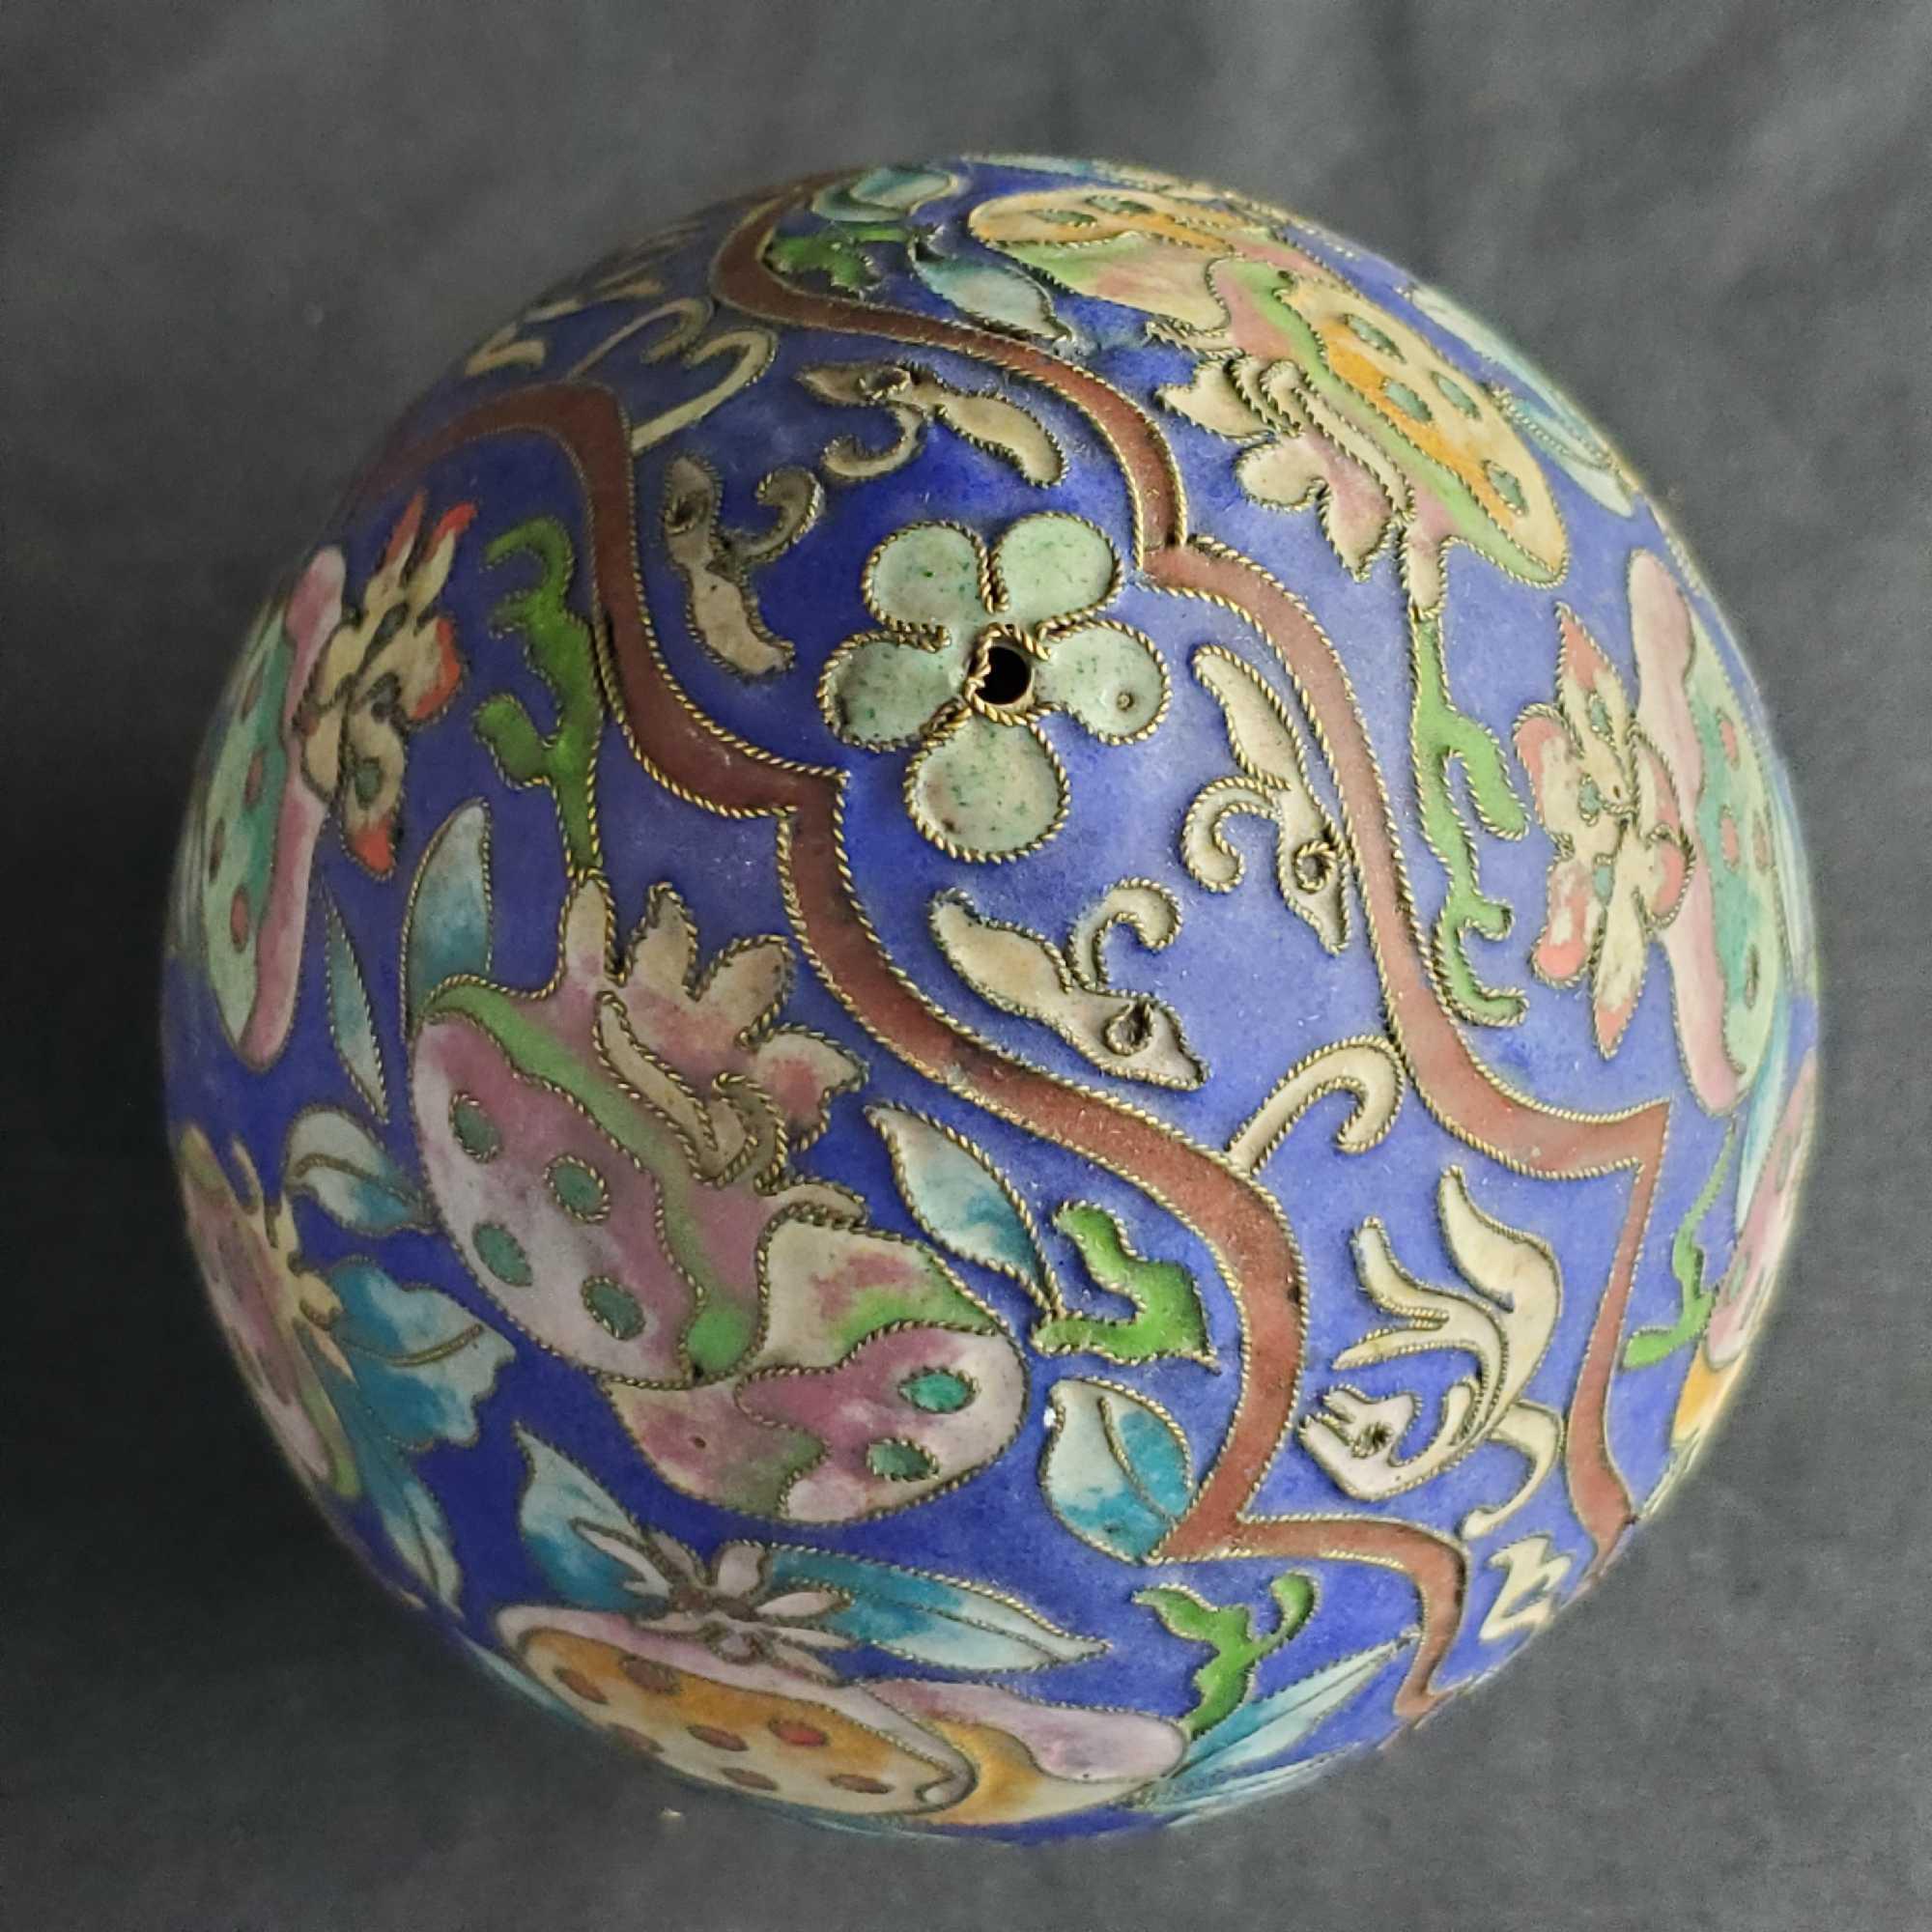 Chinoiserie Handmade Cloisonne Egg Sherry Rowe signed african safari handmade/painted egg With stand